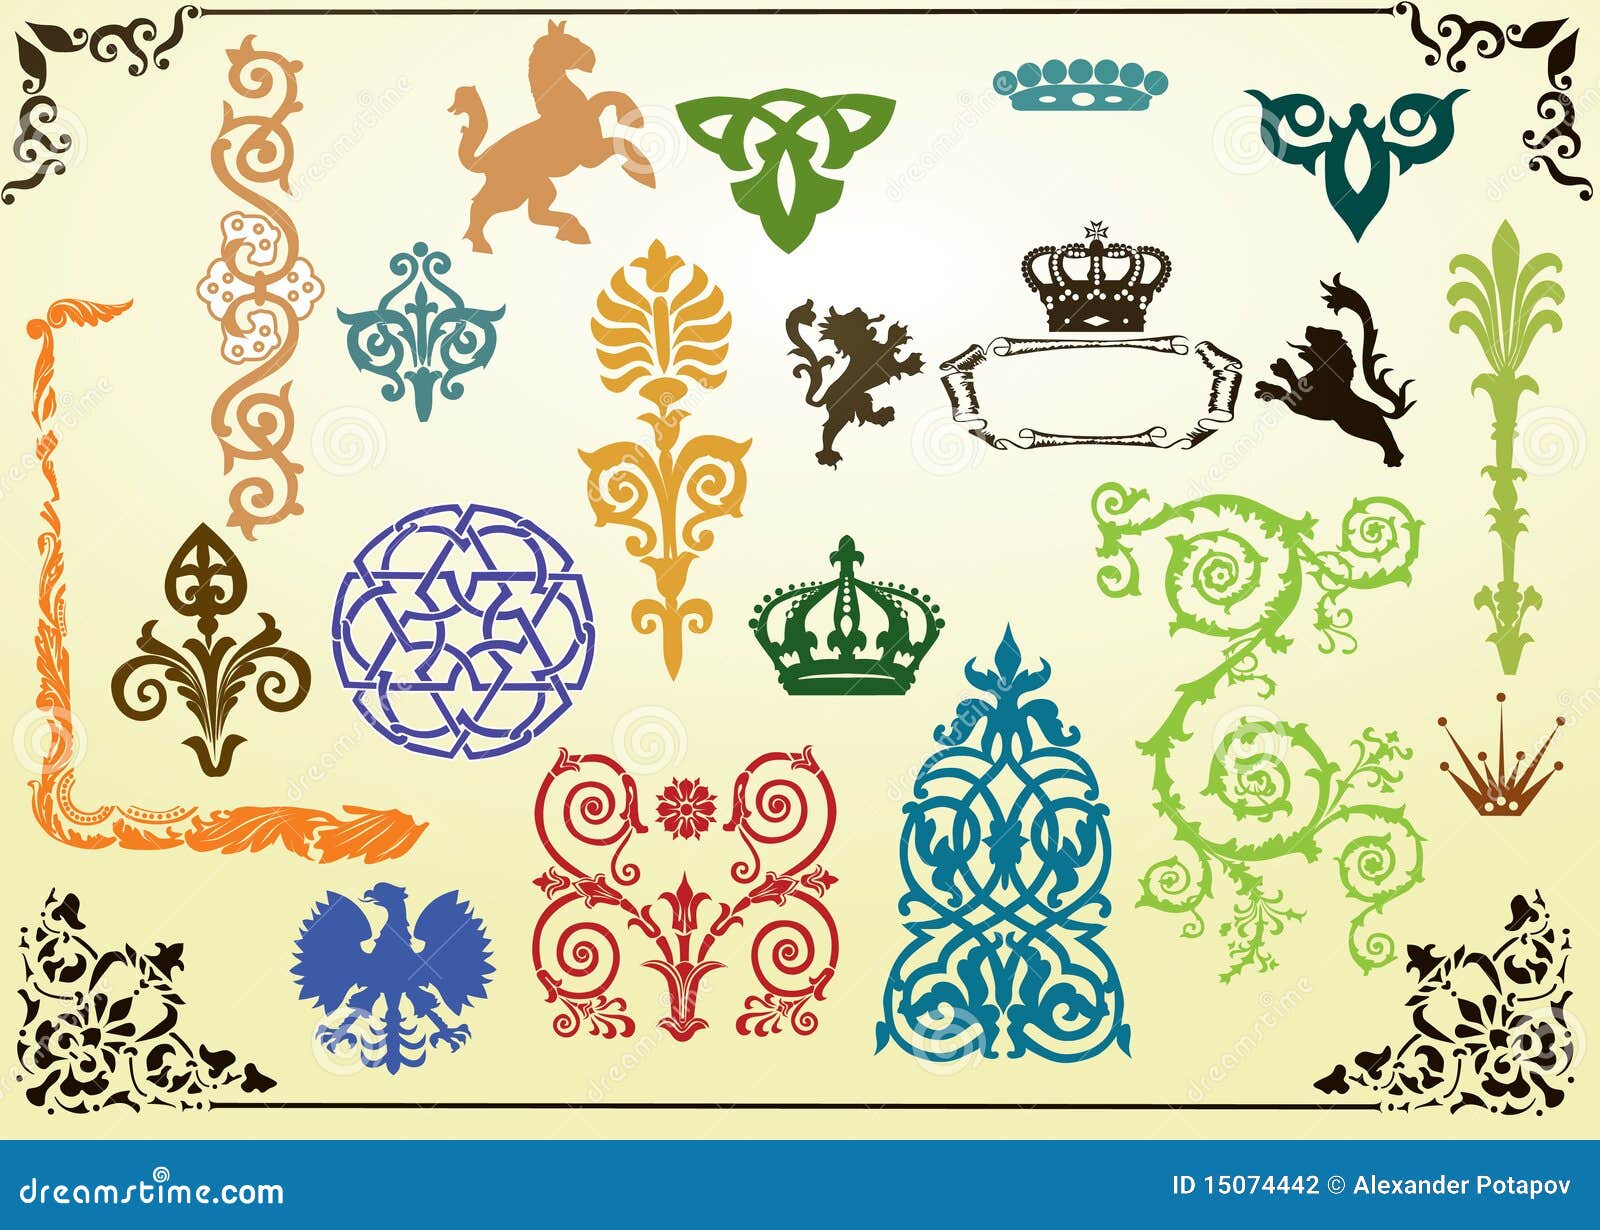 heraldic clipart collection - photo #32